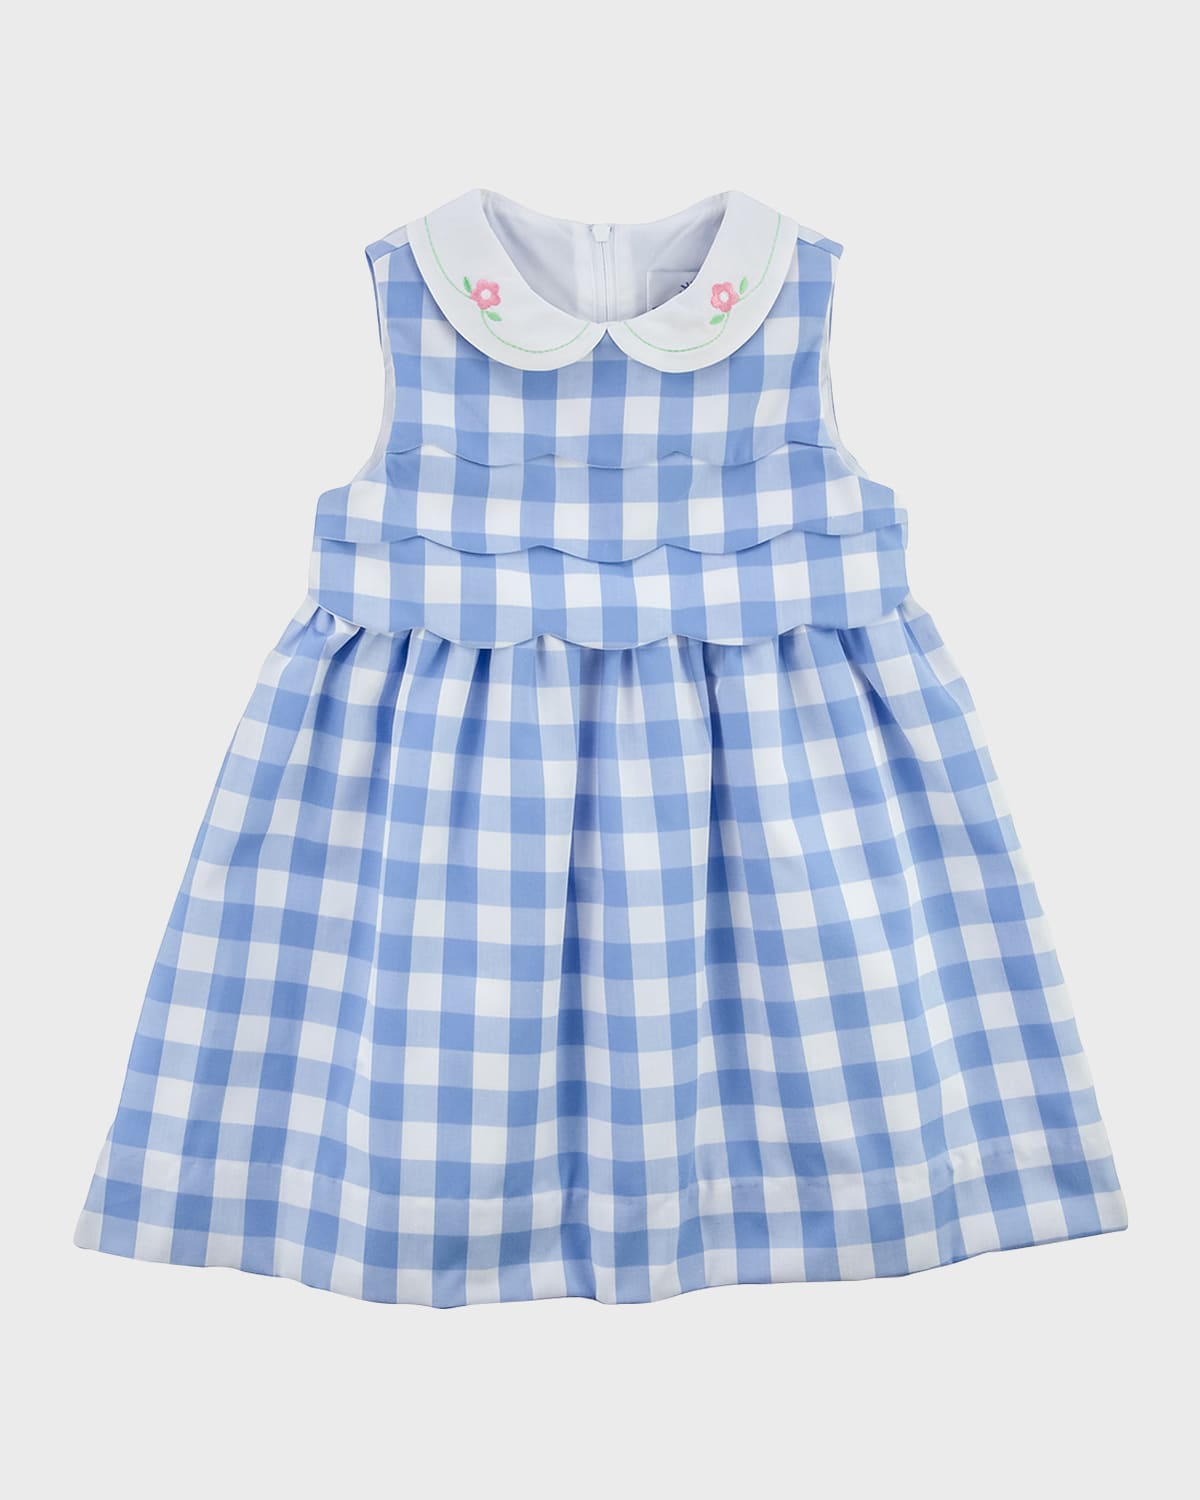 Florence Eiseman Kids' Girl's Gingham Dress With Embroidered Collar In Blue/white